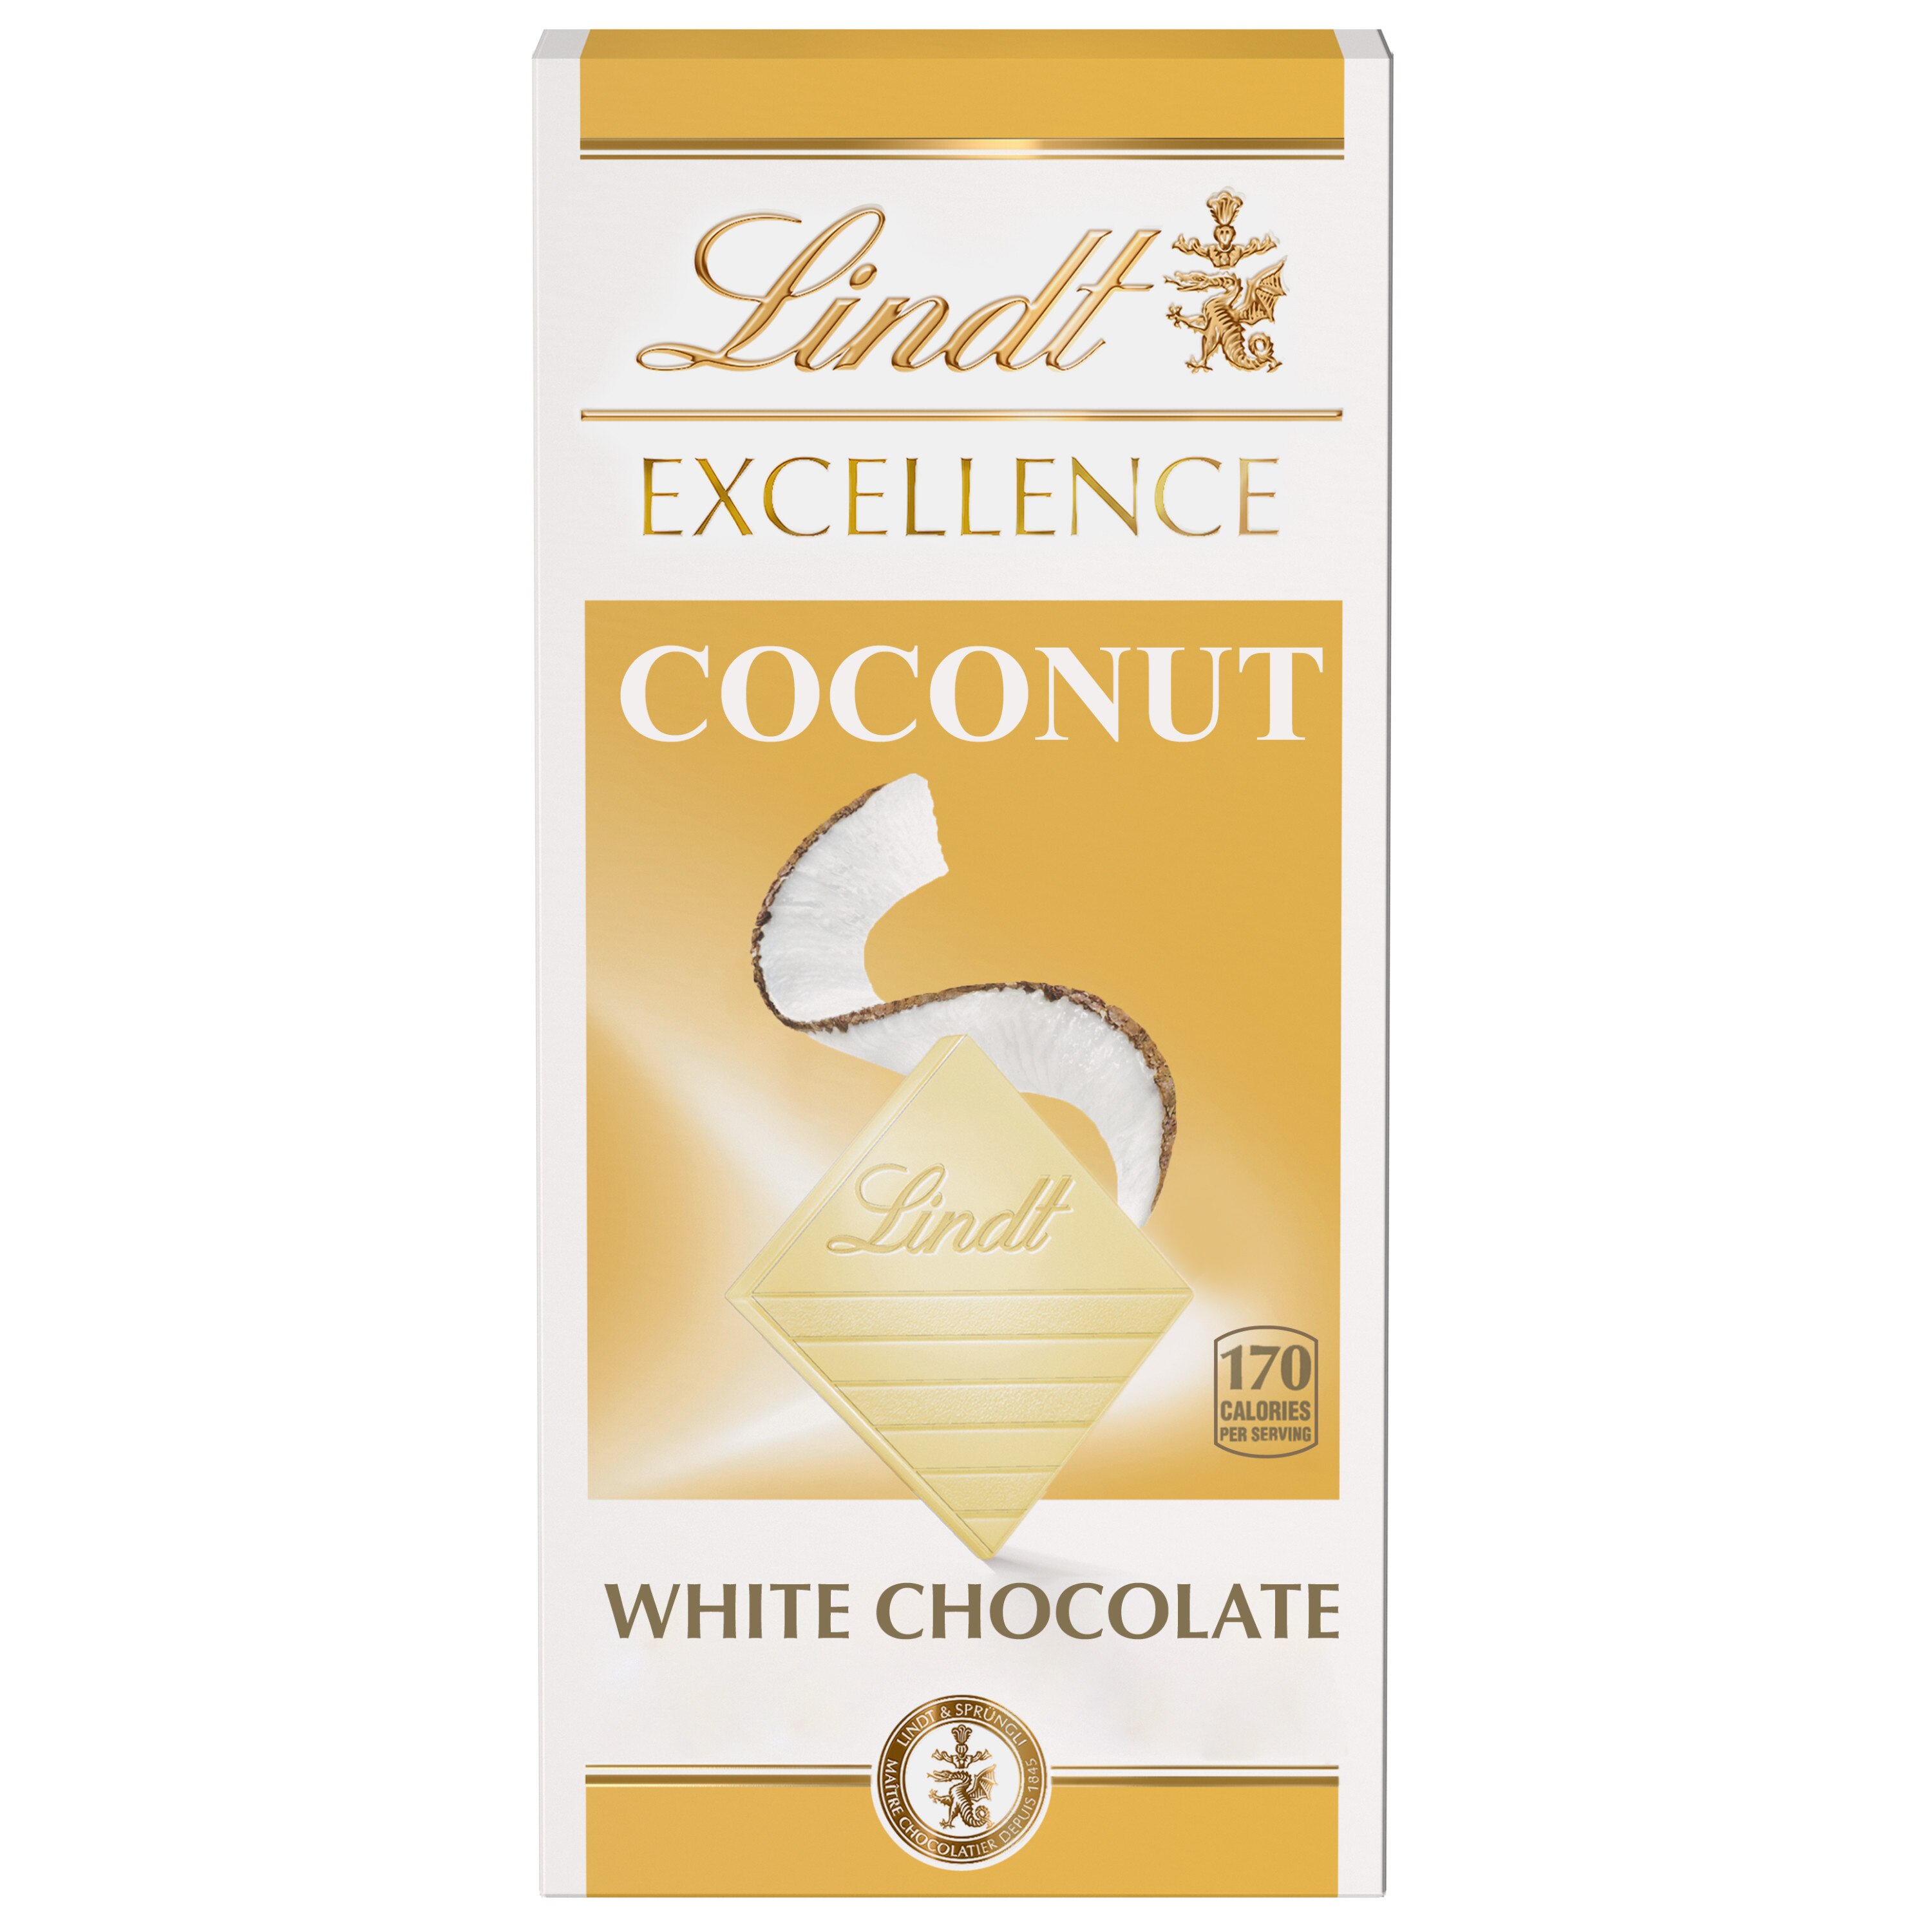 Lindt EXCELLENCE Coconut White Chocolate Bar, White Chocolate Candy with Coconut Flakes, 3.5 OZ